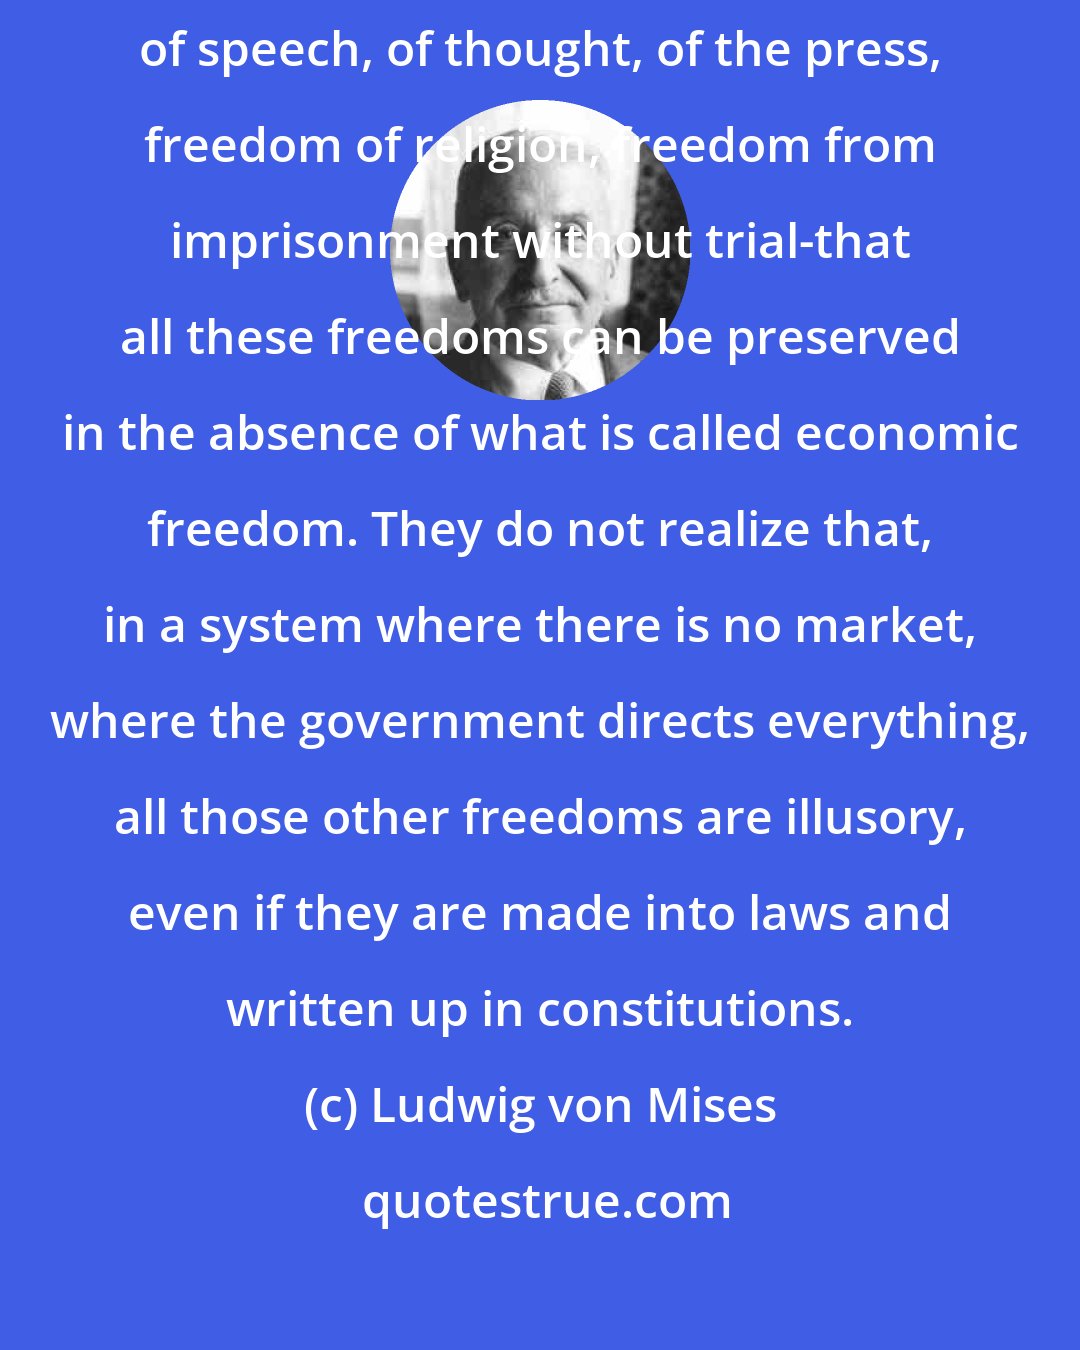 Ludwig von Mises: The so-called liberals of today have the very popular idea that freedom of speech, of thought, of the press, freedom of religion, freedom from imprisonment without trial-that all these freedoms can be preserved in the absence of what is called economic freedom. They do not realize that, in a system where there is no market, where the government directs everything, all those other freedoms are illusory, even if they are made into laws and written up in constitutions.